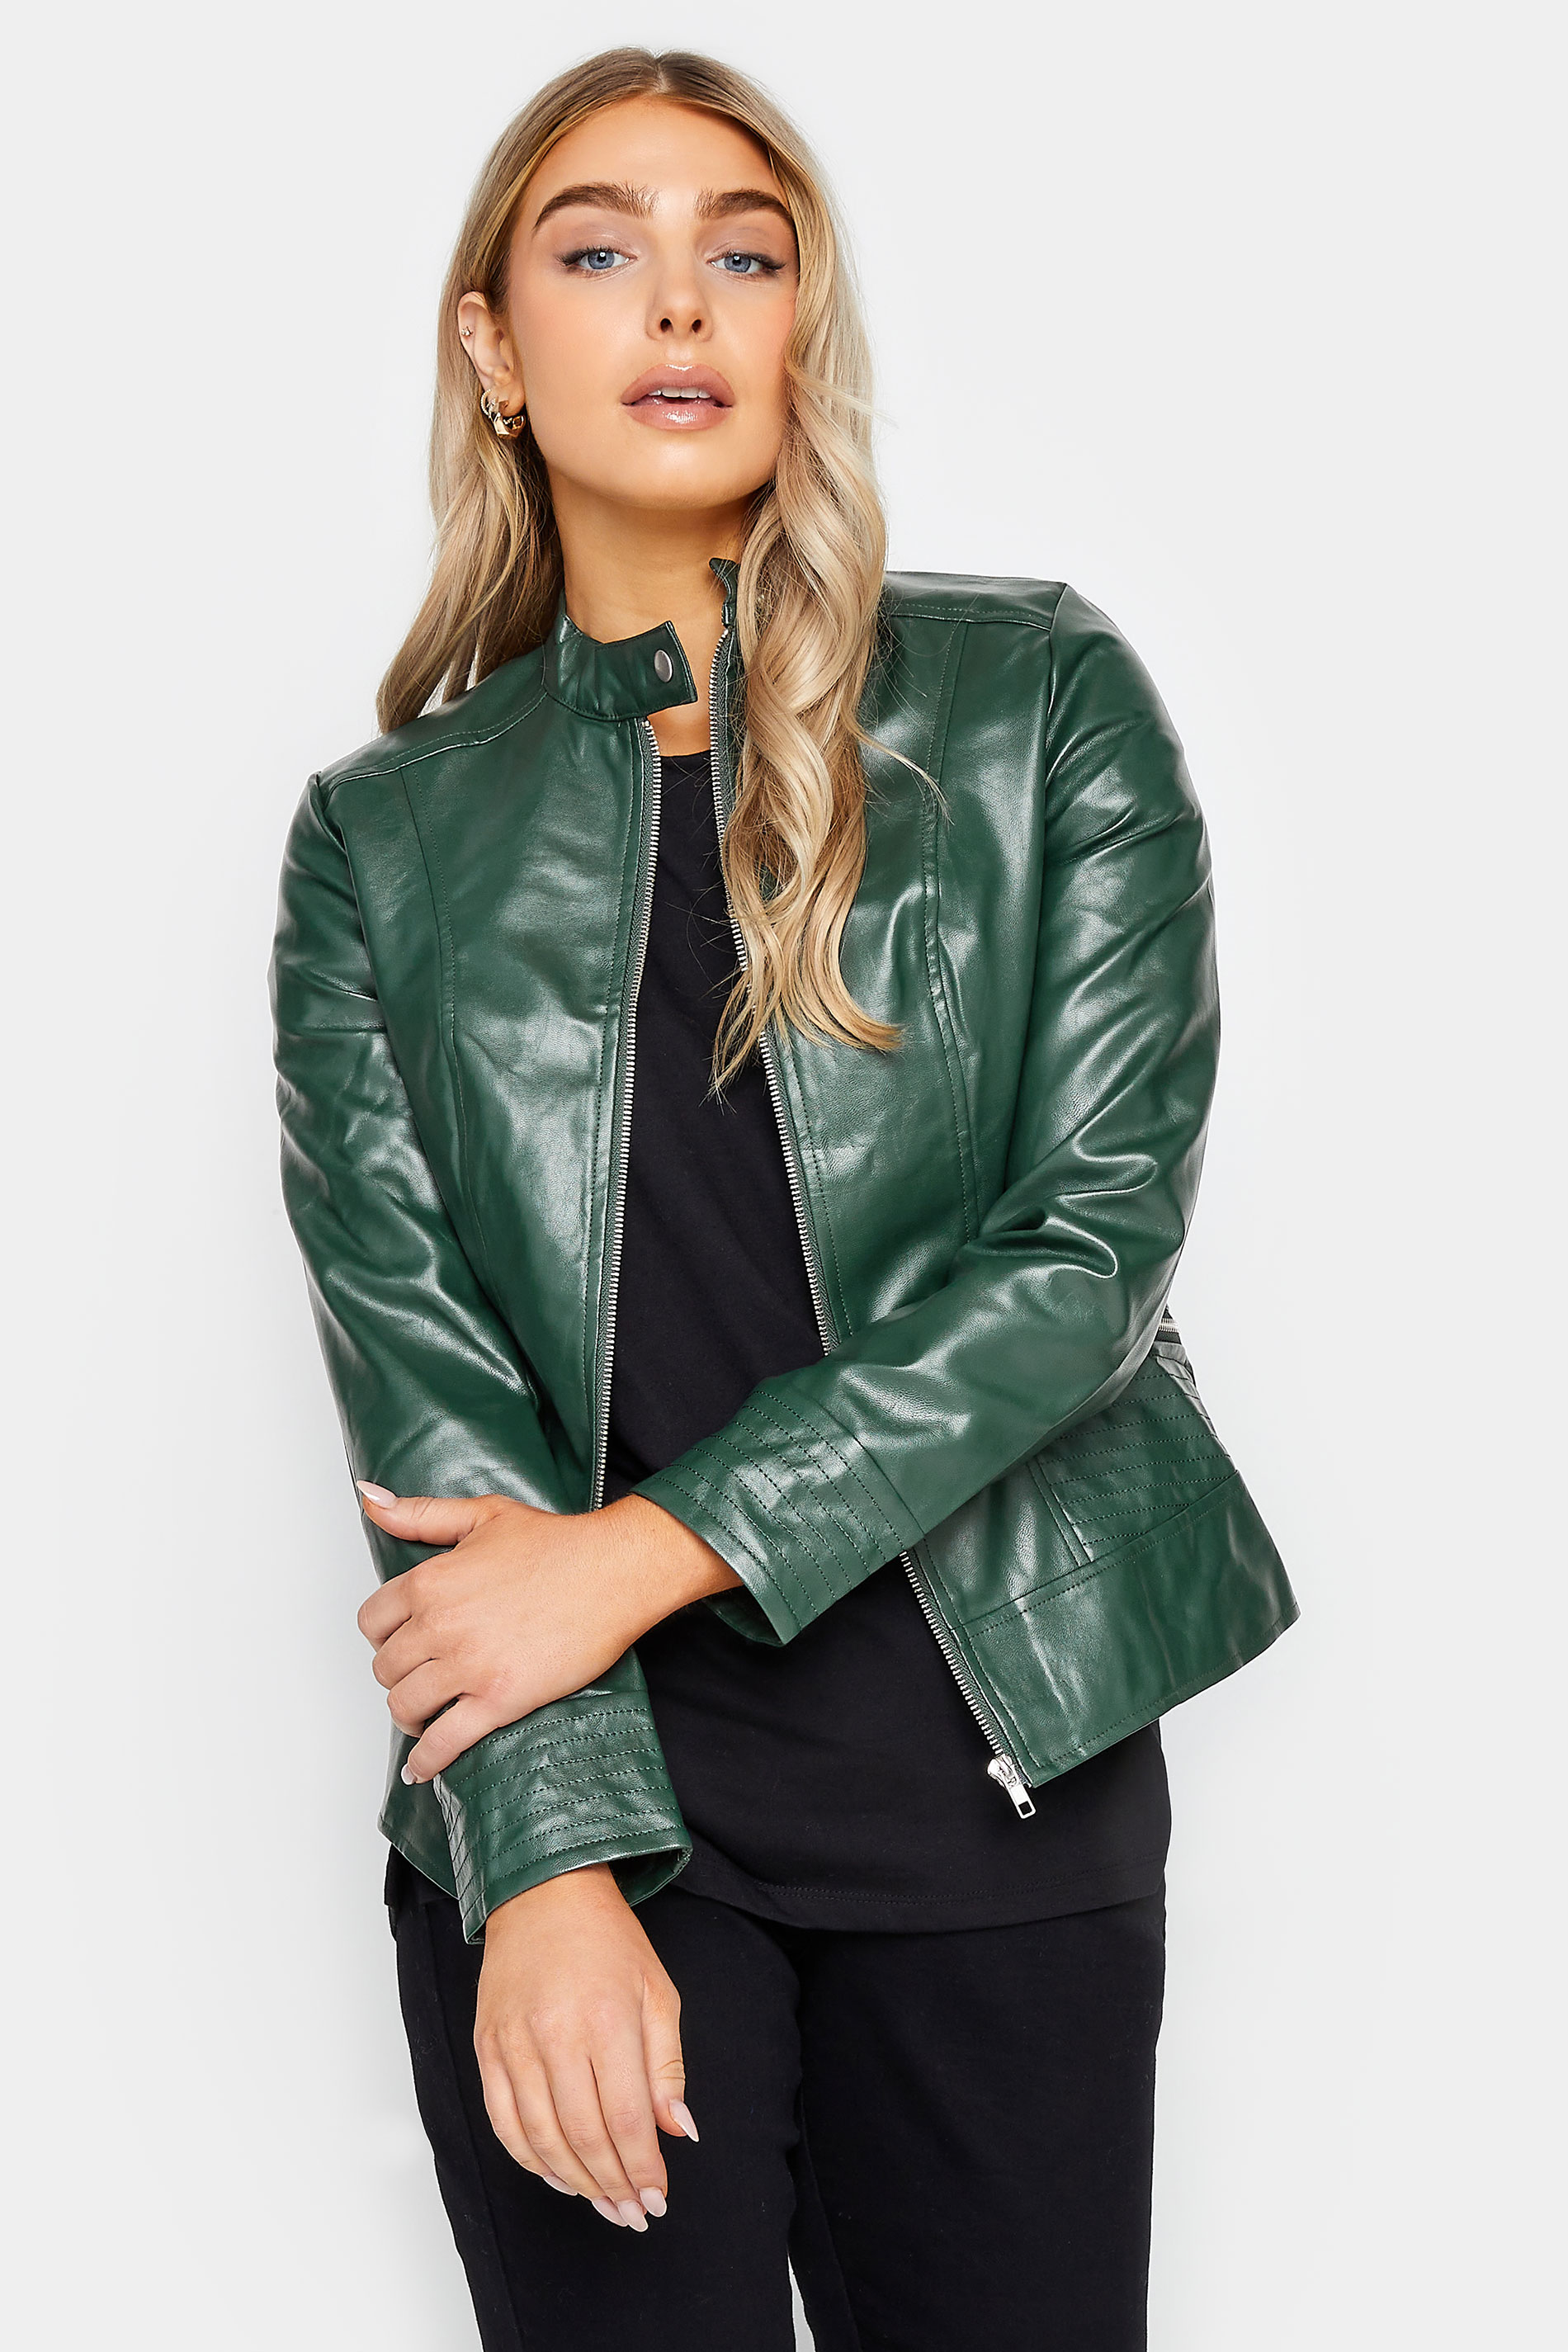 M&Co Dark Green Faux Leather Jacket | M&Co 1